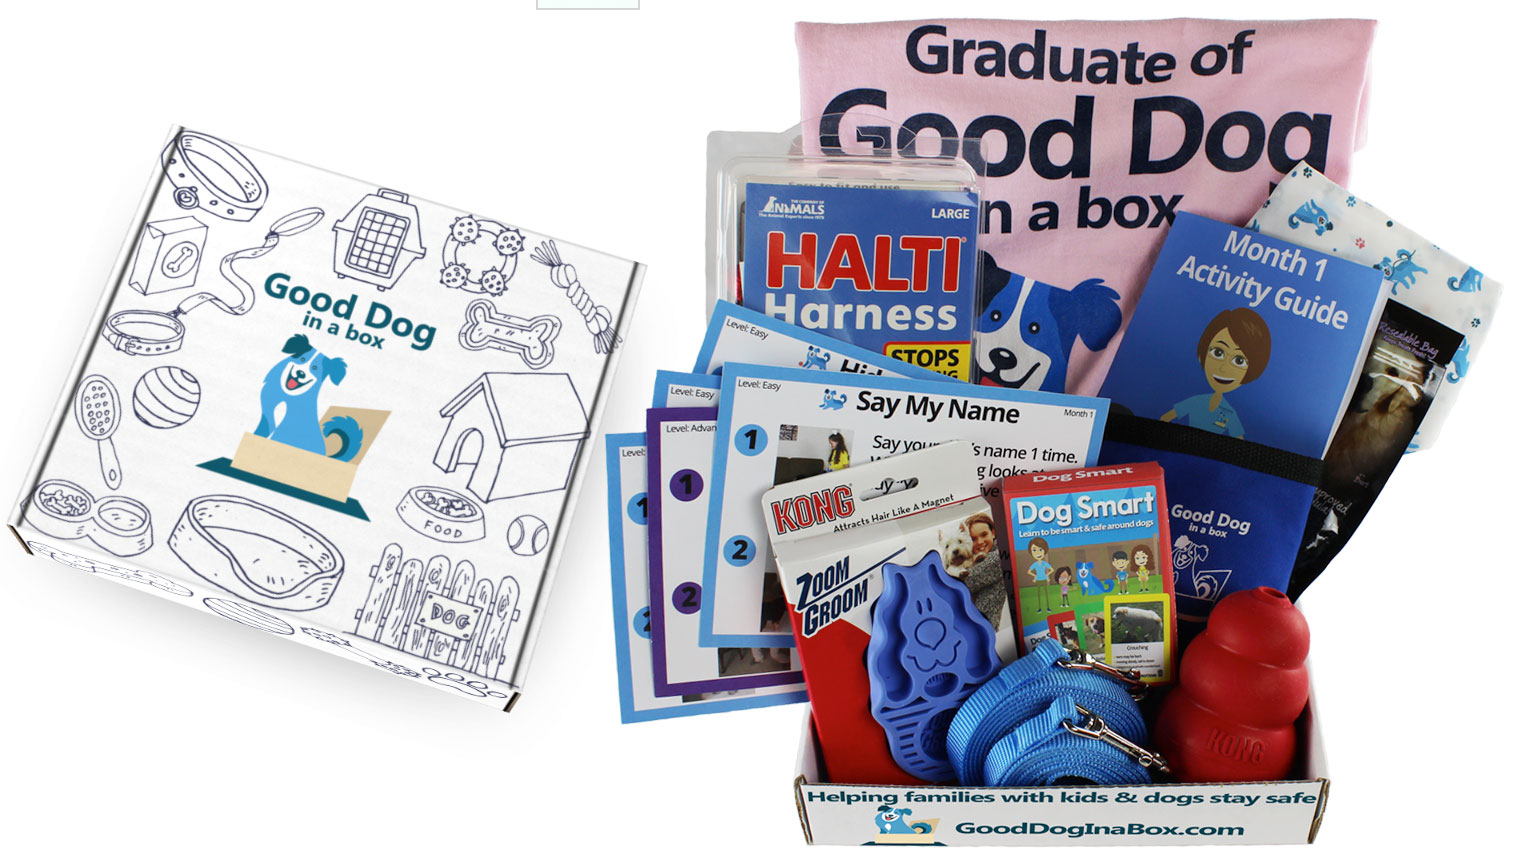 Kids can decorate Good Dog in a Box mailer carton and enter it in monthly online contests.